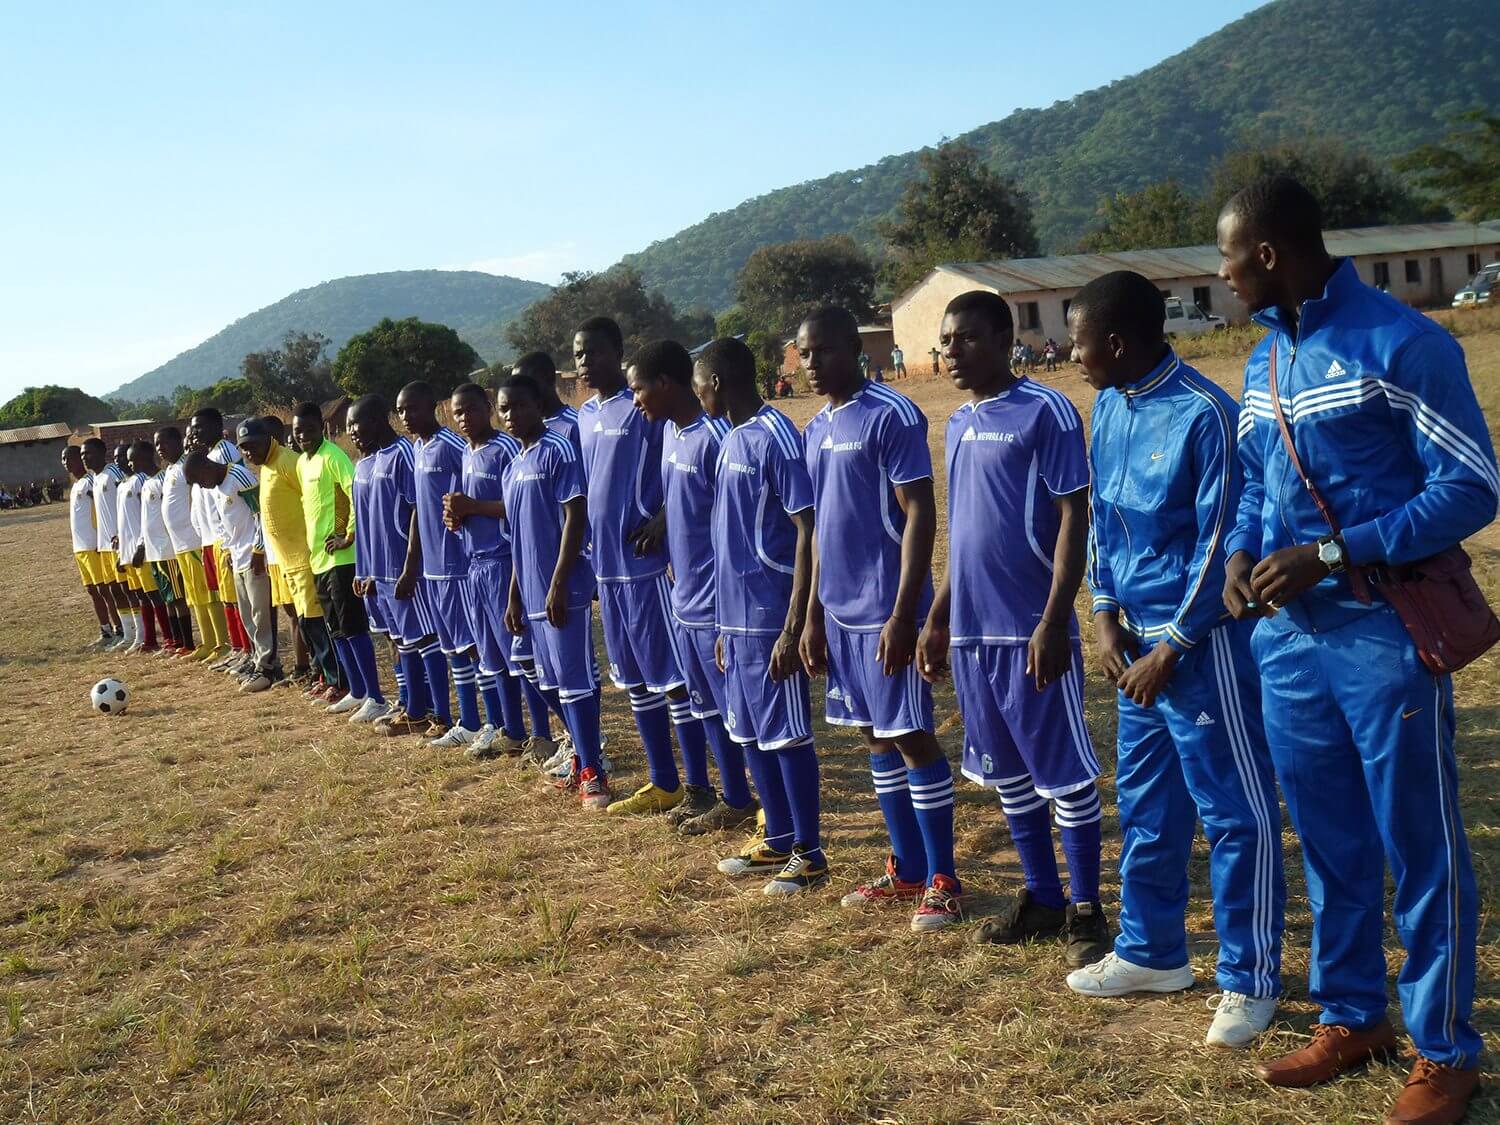 Tanzania Ngwala Village Football Team prepare to commence a match kits were donated by Peak June 2013